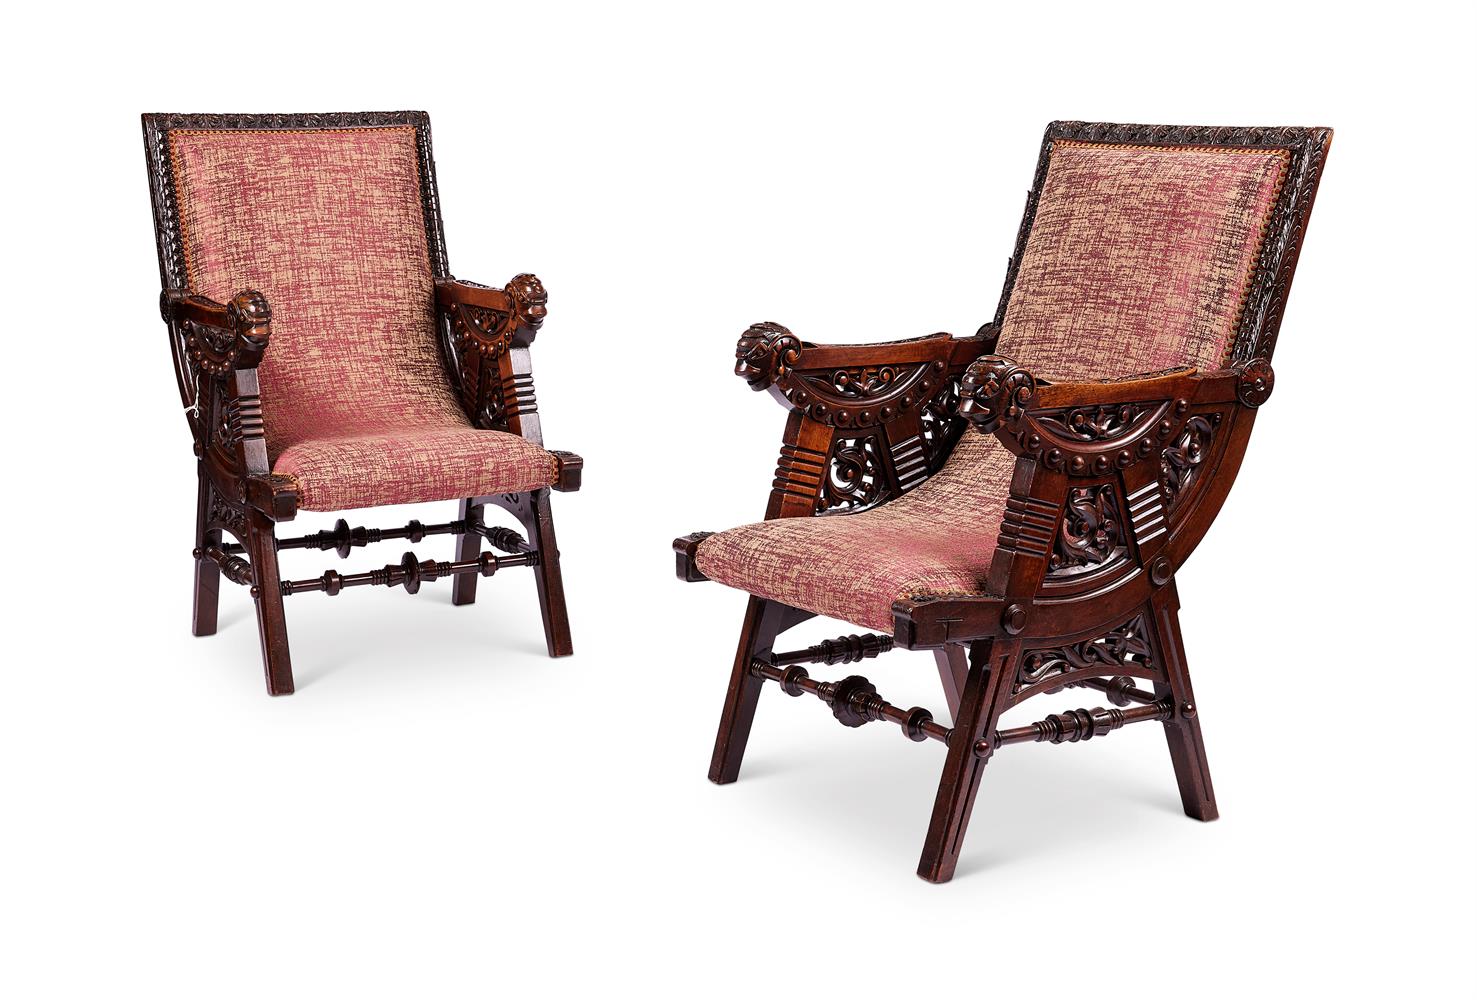 A PAIR OF AESTHETIC PERIOD CARVED WALNUT AND UPHOLSTERED ARMCHAIRS, LATE 19TH CENTURY